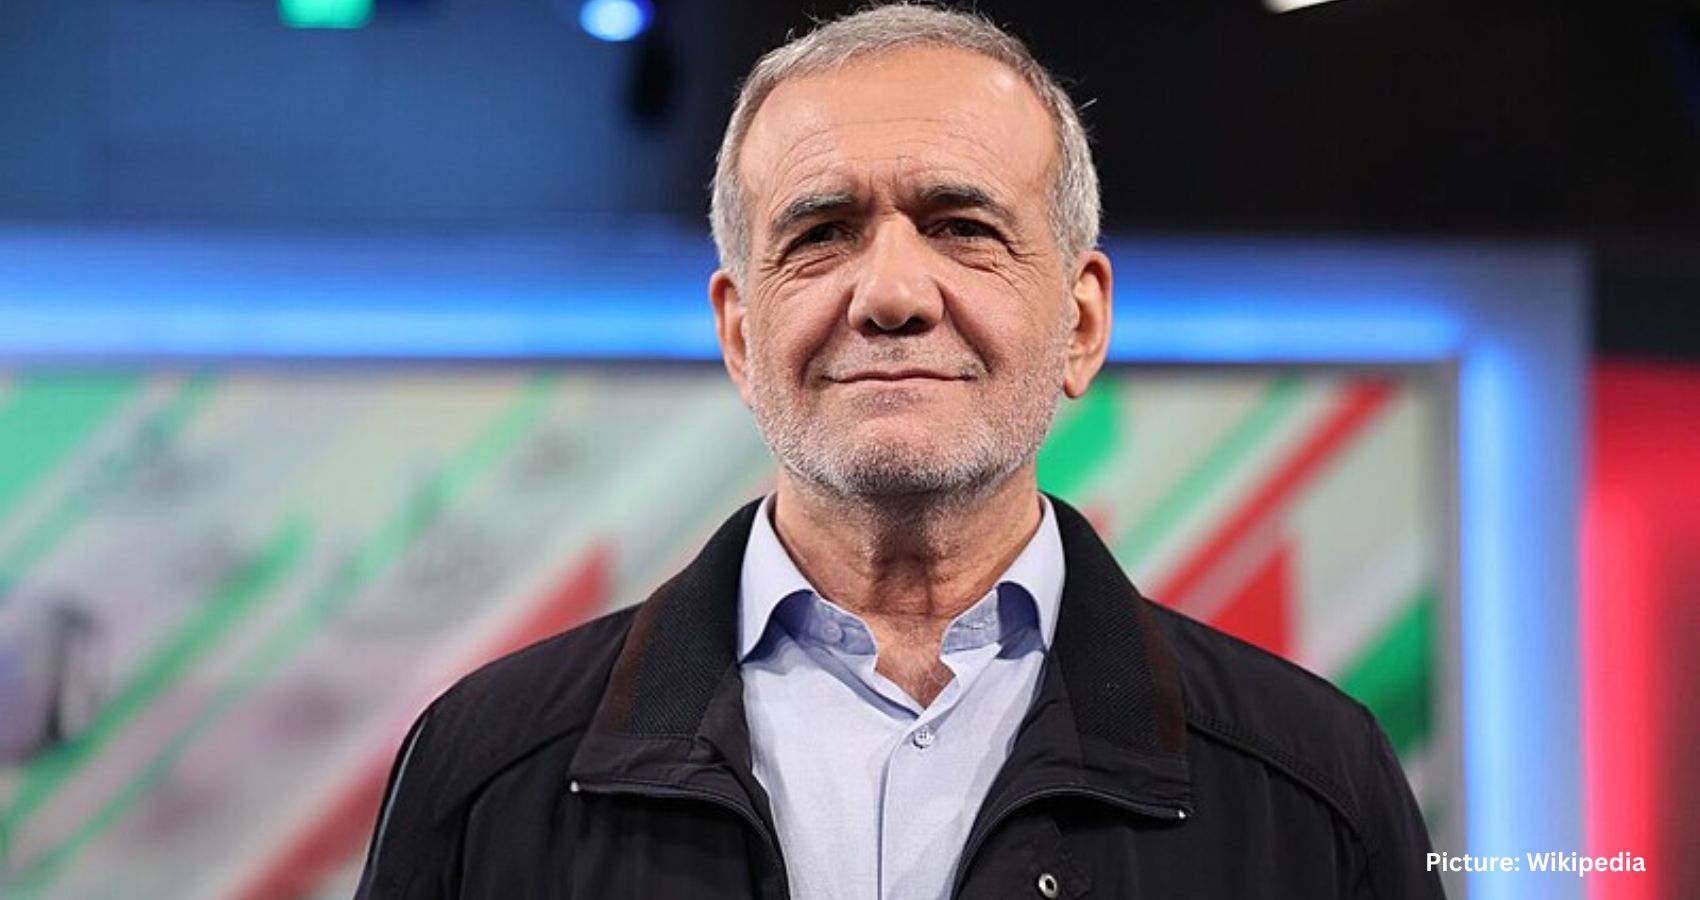 Reformist Masoud Pezeshkian Wins Iranian Presidency Amid Low Voter Turnout and Calls for Change